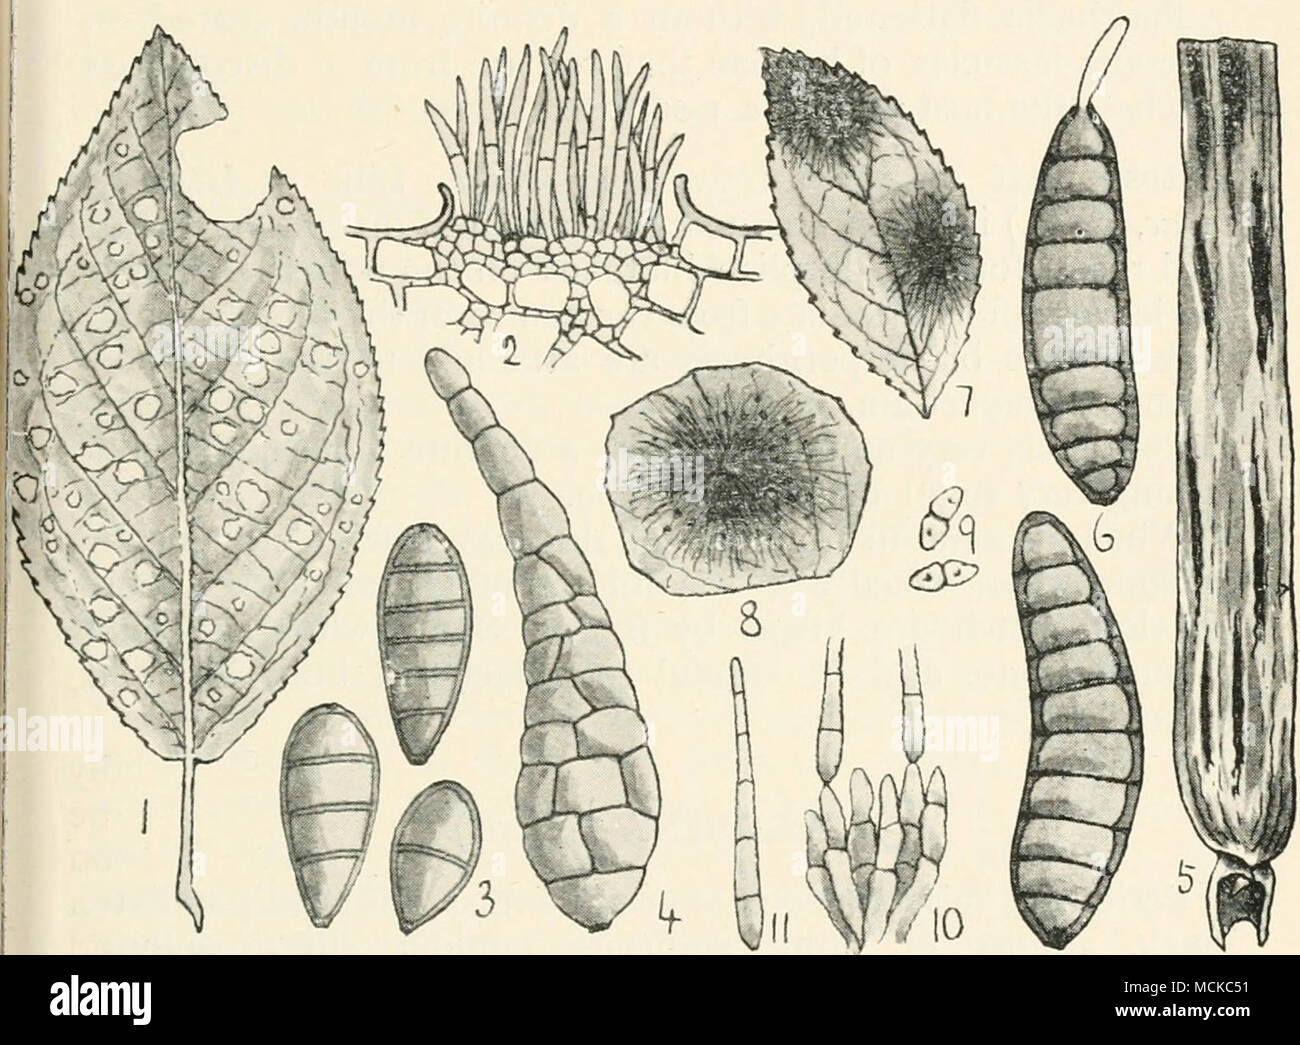 . Fig. 132. — Cylindrosporiiirn padi. i, spots caused by fungus on a plum leaf; 2, section through a pustule of conidia of same; 3, conidia of Exosforium tiliae ; 4, conidium of Sporodesmium brassicae; 5, Helminthosporium gram- inum on barley leaf; 6, conidia of same; 7, Aciinotnena rosae on rose leaf; 8, single blotch of same, showing perithecia ; 9, conidia of same; 10, conidiophores of Cercospora i-esedae; 11, single conidium of same. Figs. I, 5, and 7 about nat. size ; remainder highly mag. the grain by forming a blackish-brown, crust-like weft, which involves a portion or sometimes the wh Stock Photo